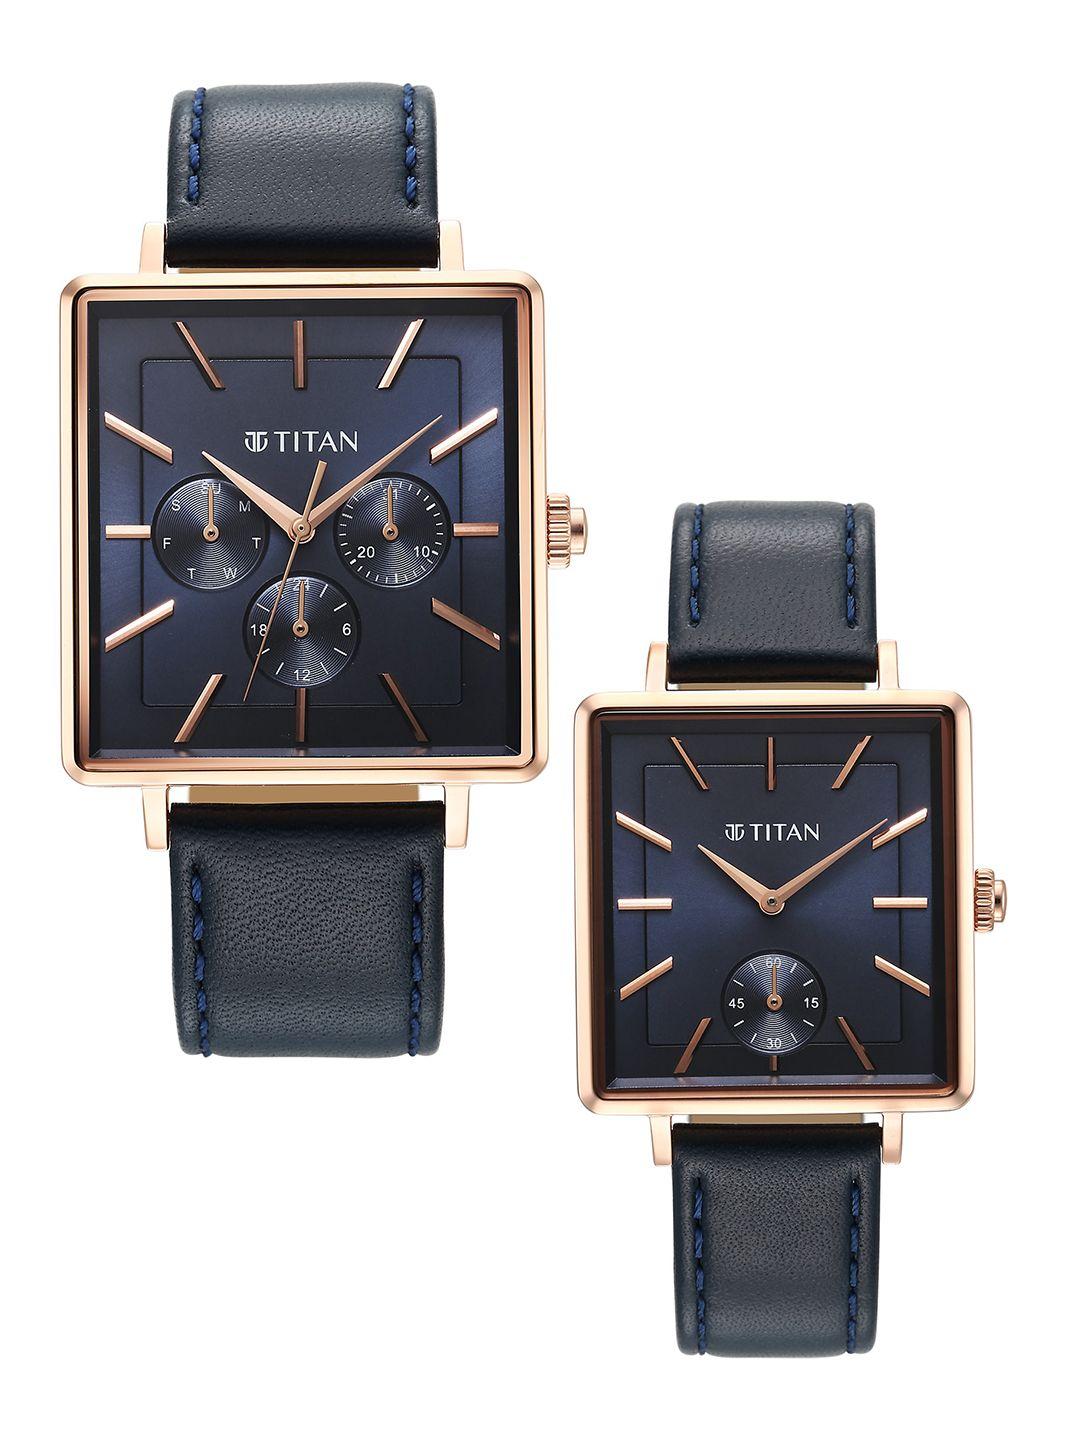 titan-set-of-2-dial-&-leather-straps-analogue-couple-analogue-watch-9400594205wl01